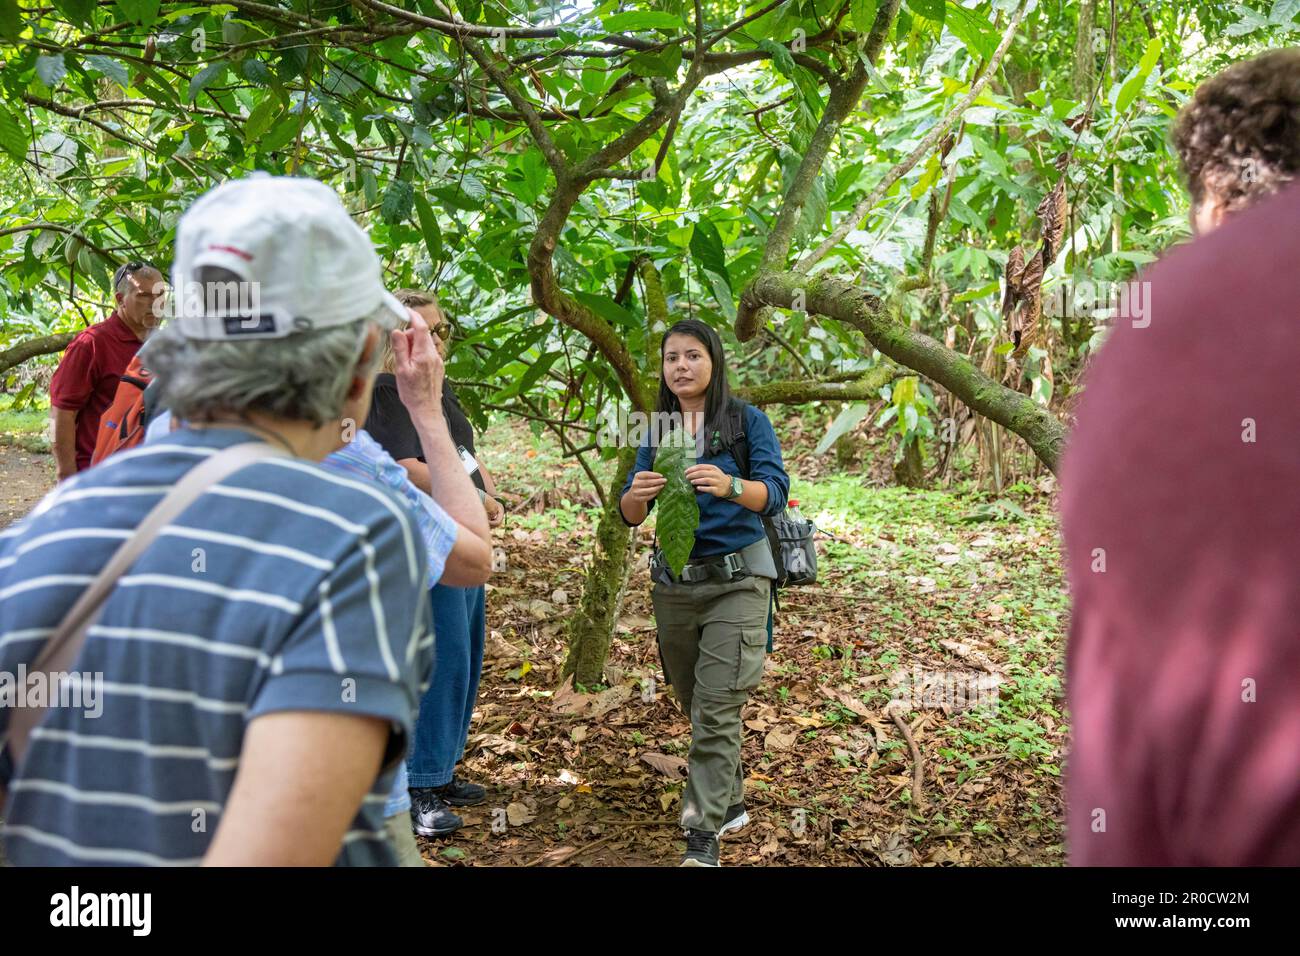 La Virgen, Costa Rica - Visitors to the Tirimbina research station learn about the cacao plant and how chocolate is made from cacao beans. Stock Photo